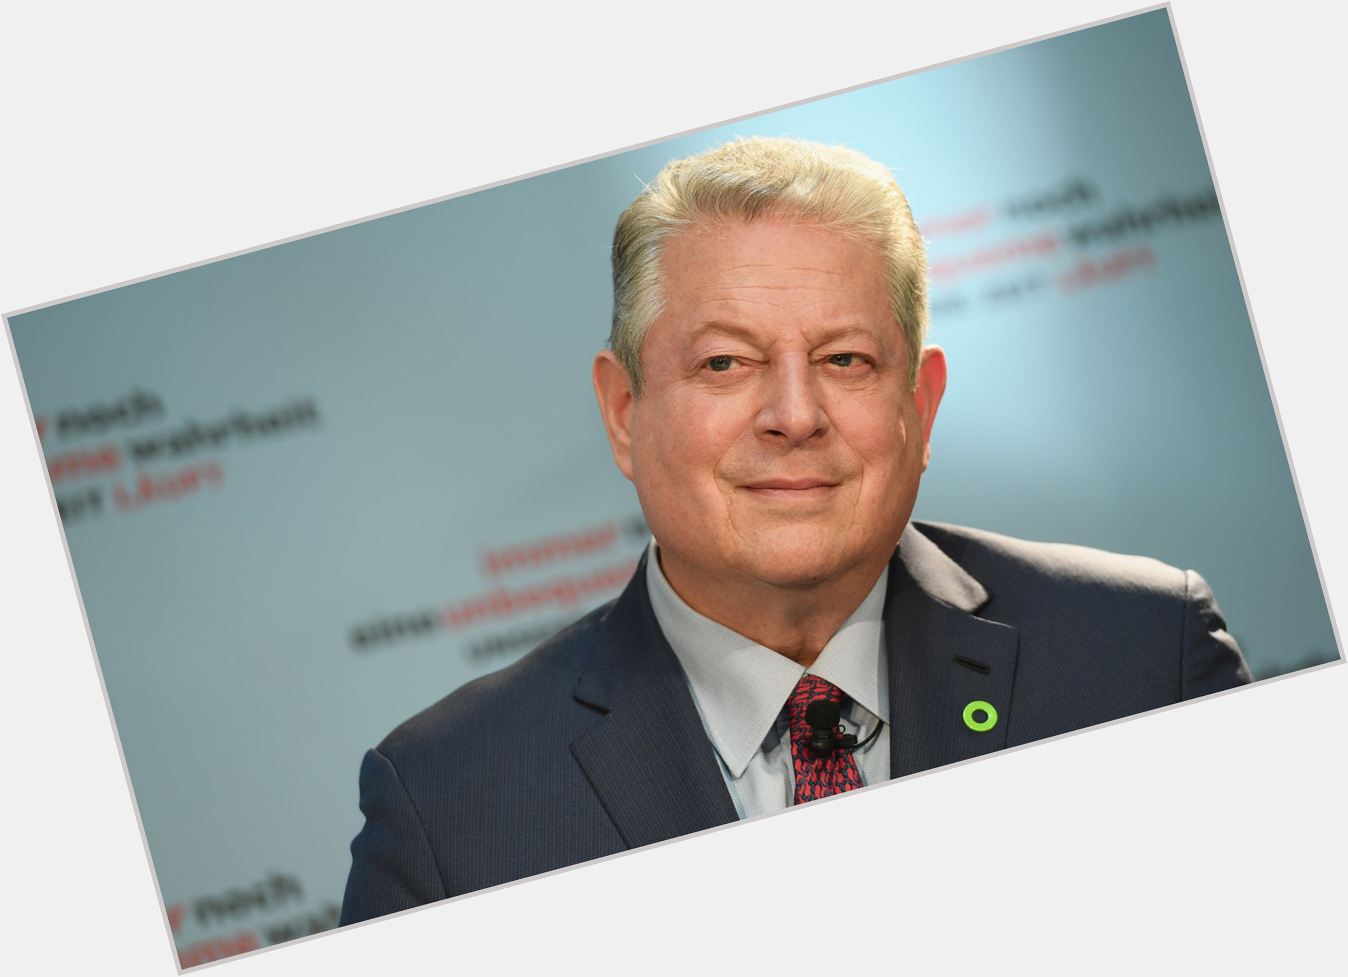 Happy Birthday to Al Gore, former Vice-President of the United States!  